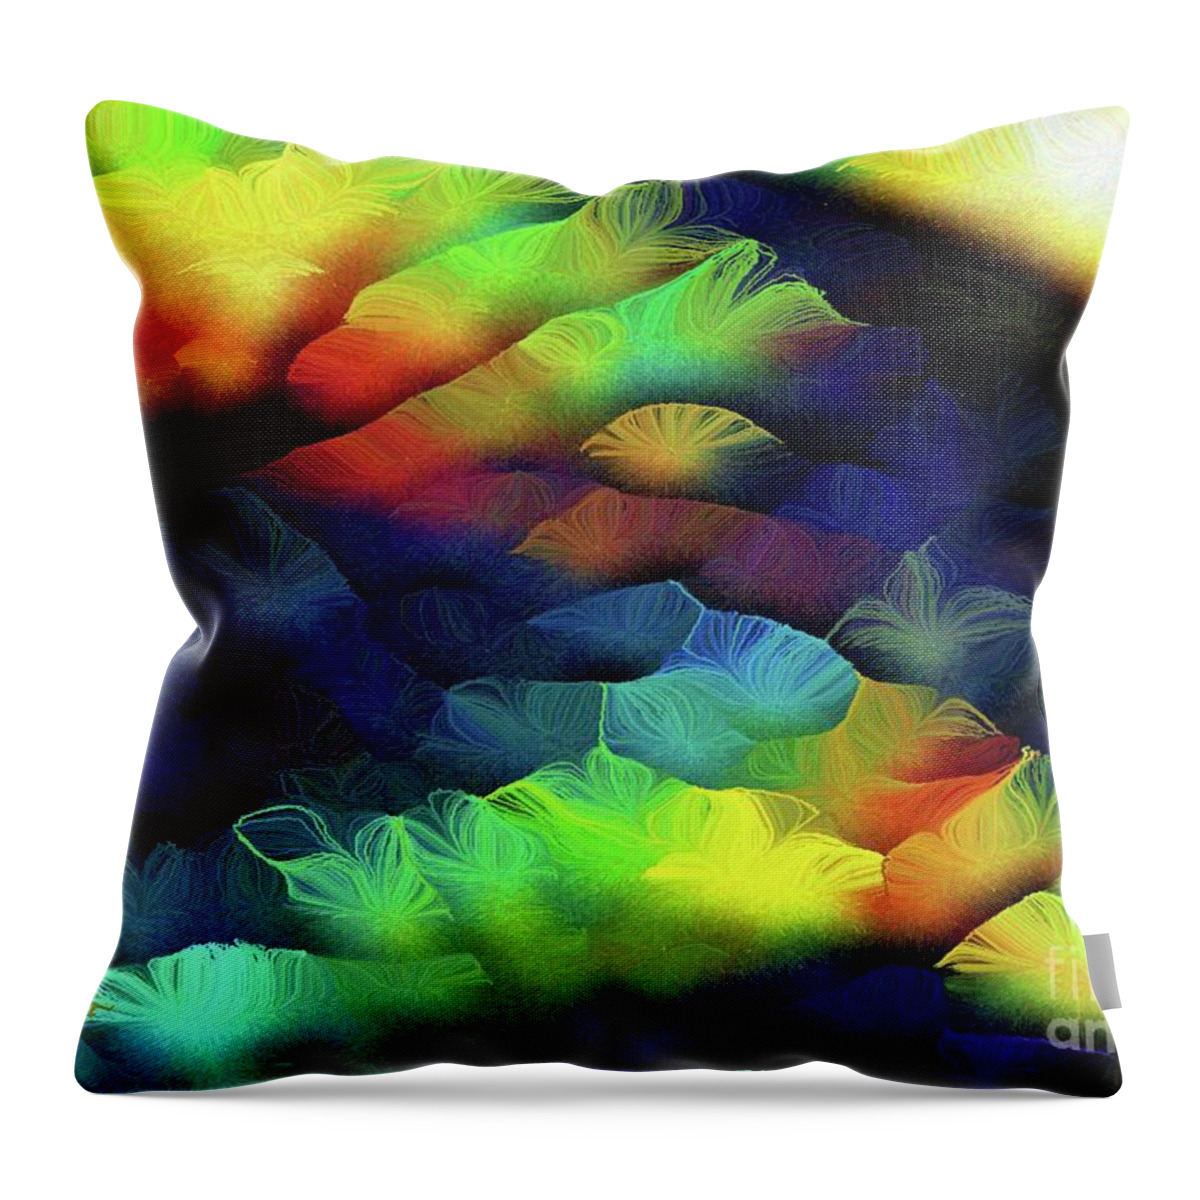 Abstract Landscape Throw Pillow featuring the painting Sunrise in the Valley of Compassion by Aberjhani